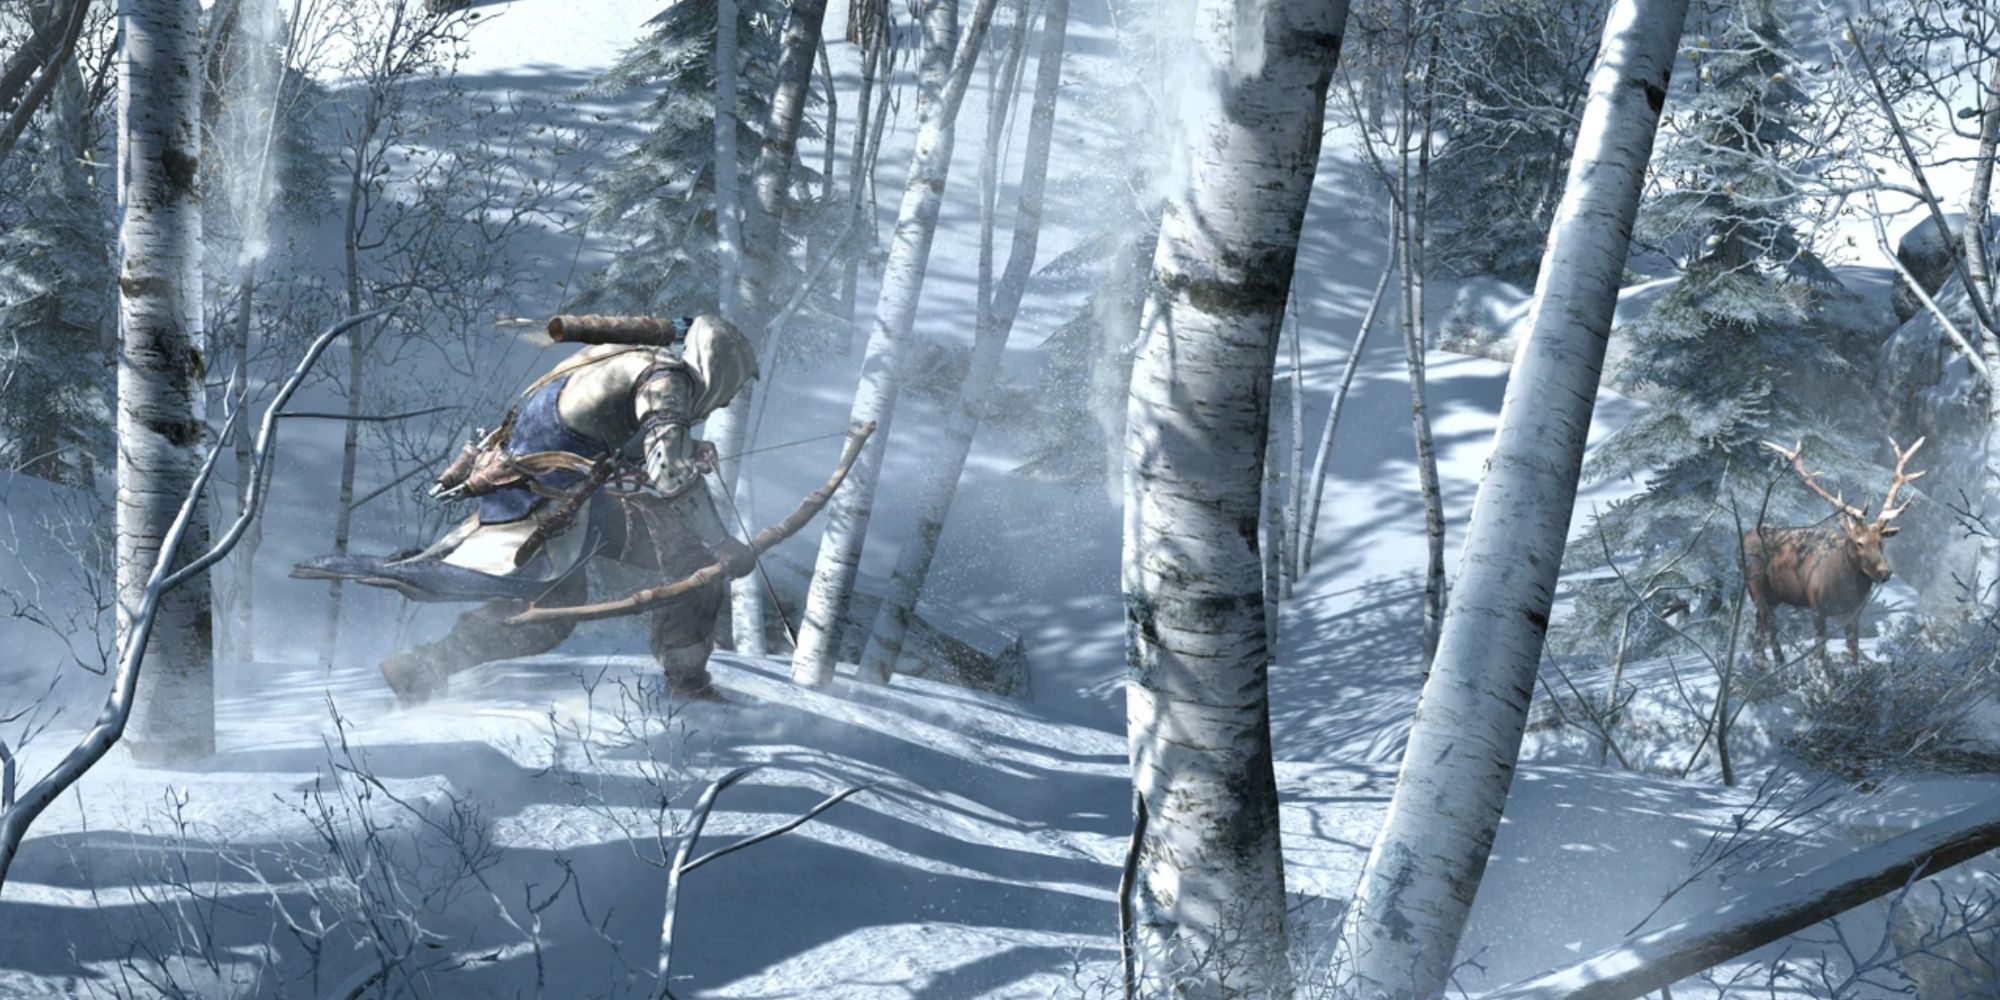 An image of gameplay from Assassin's Creed III